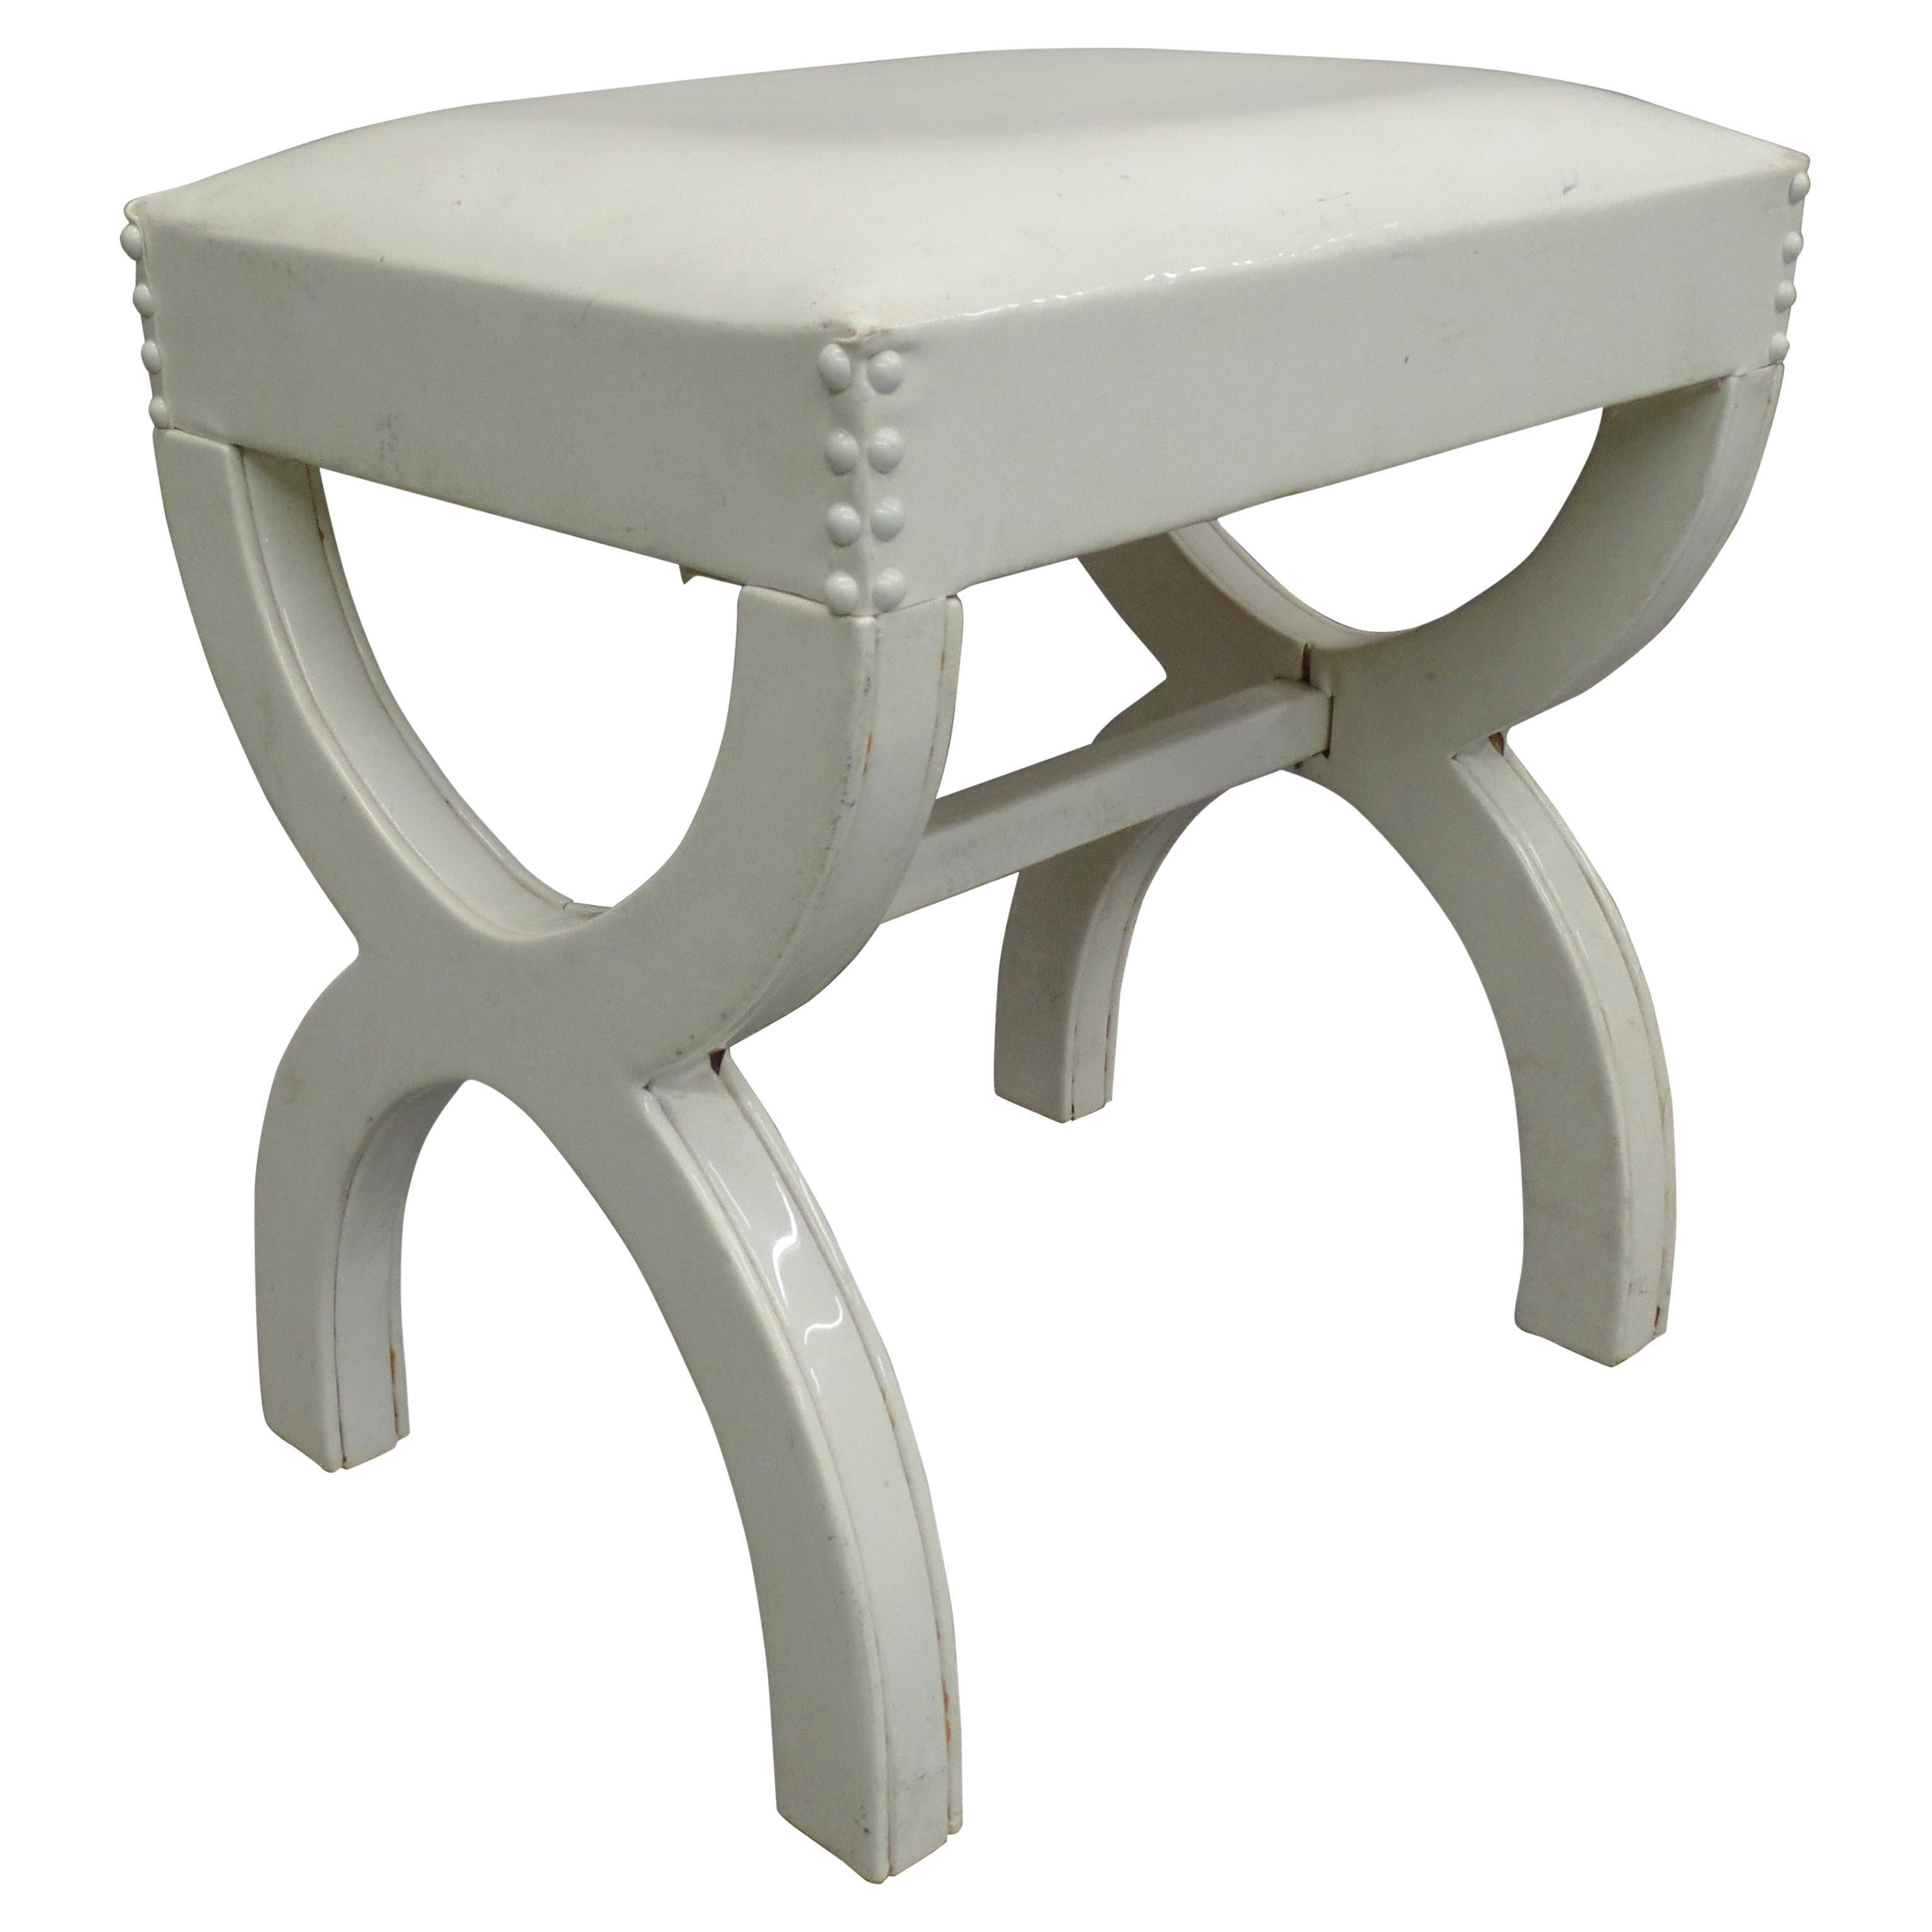 French Modern Neoclassical Bench in White Simi-Leather in style of Andre Arbus For Sale